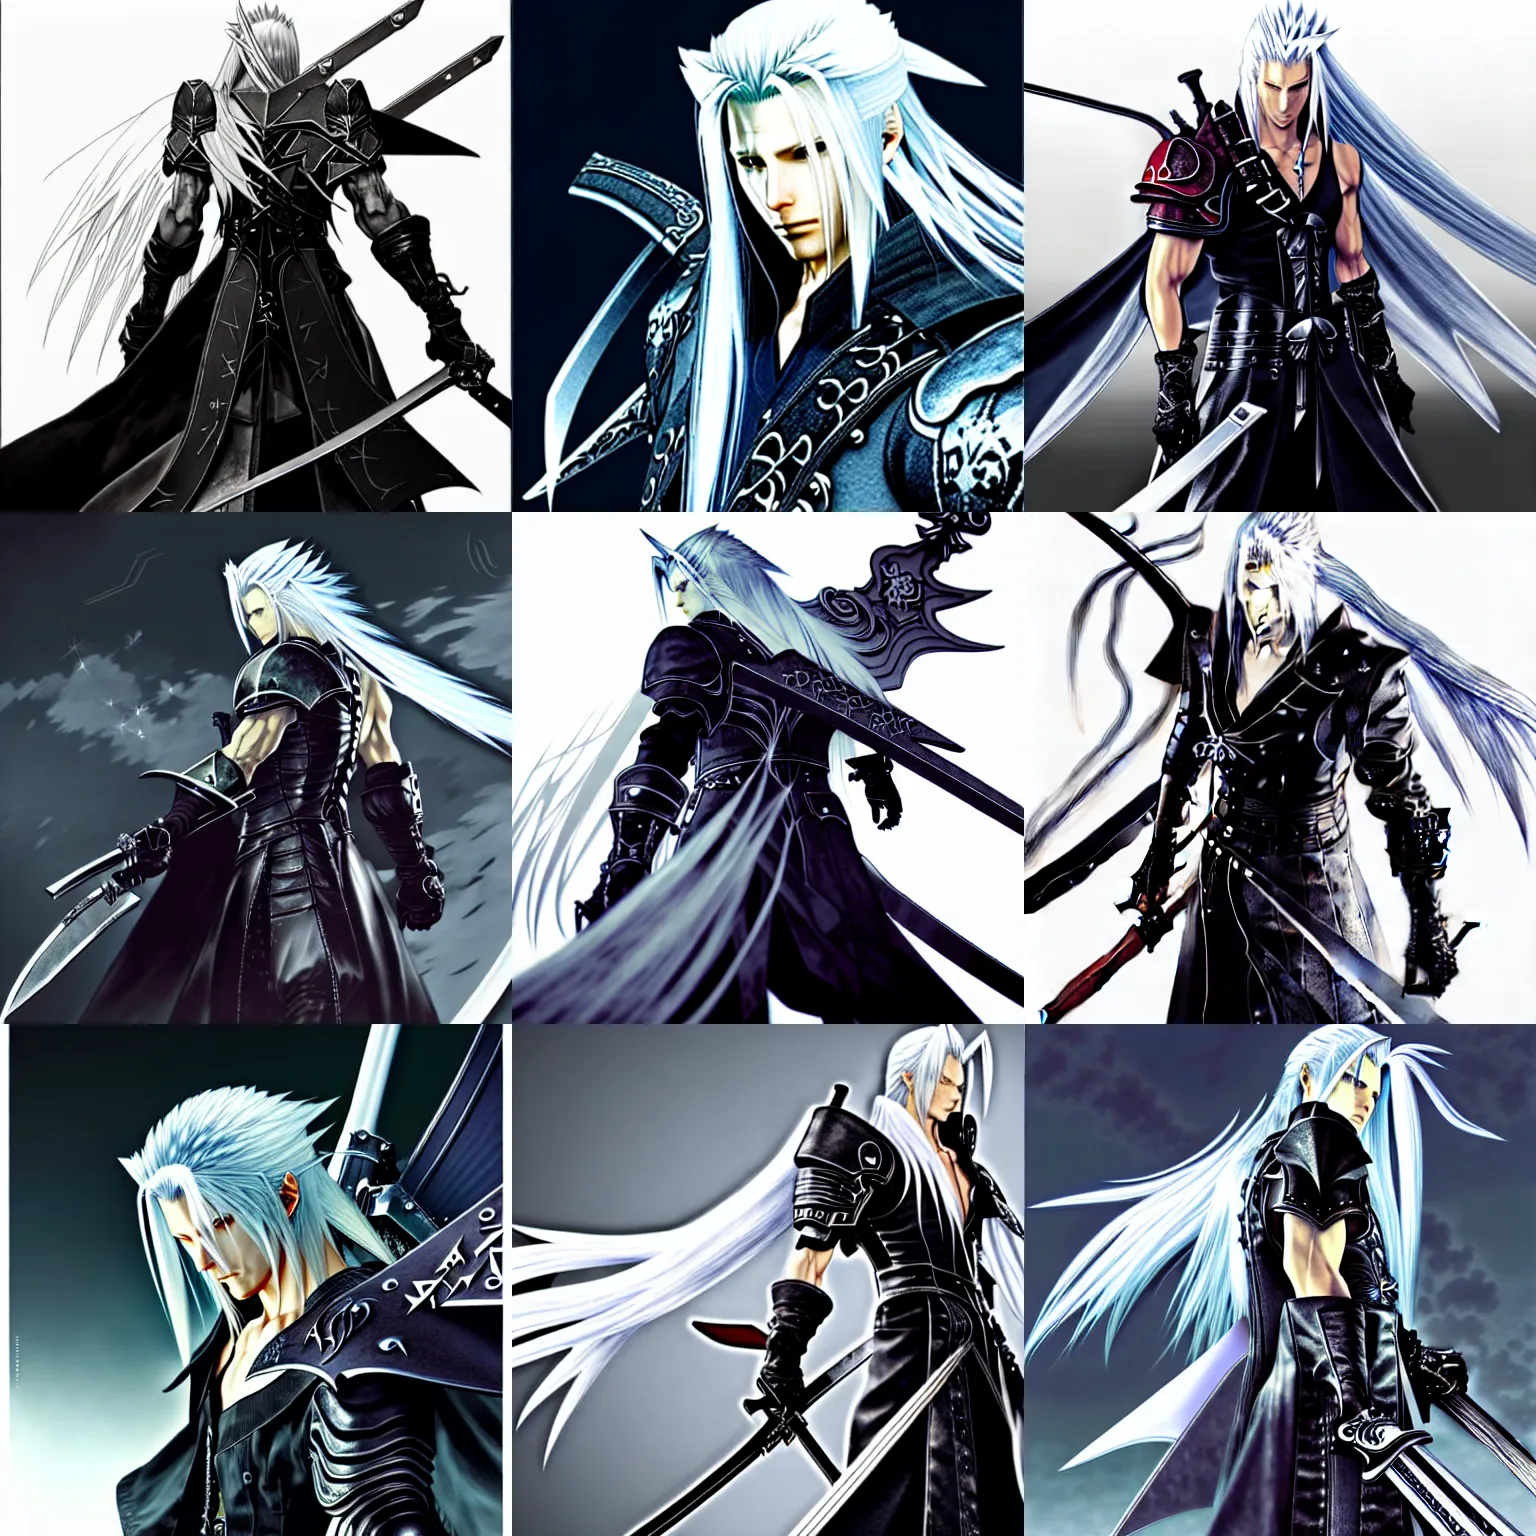 Prompt: sephiroth illustrated by akihiko yoshida, concept artwork, highly detailed